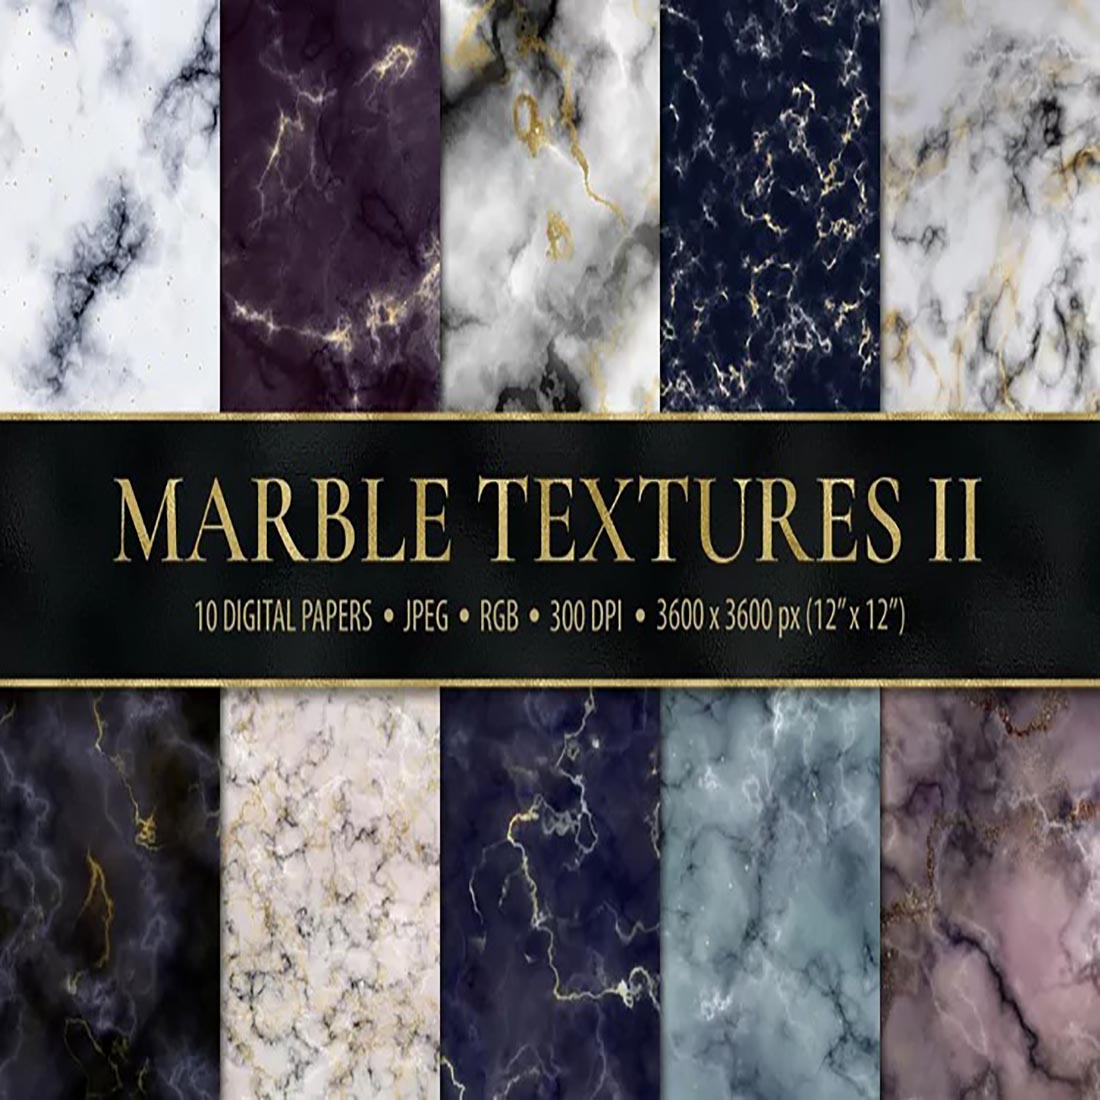 Marble Digital Papers - 10 Veined Marble Textures cover image.